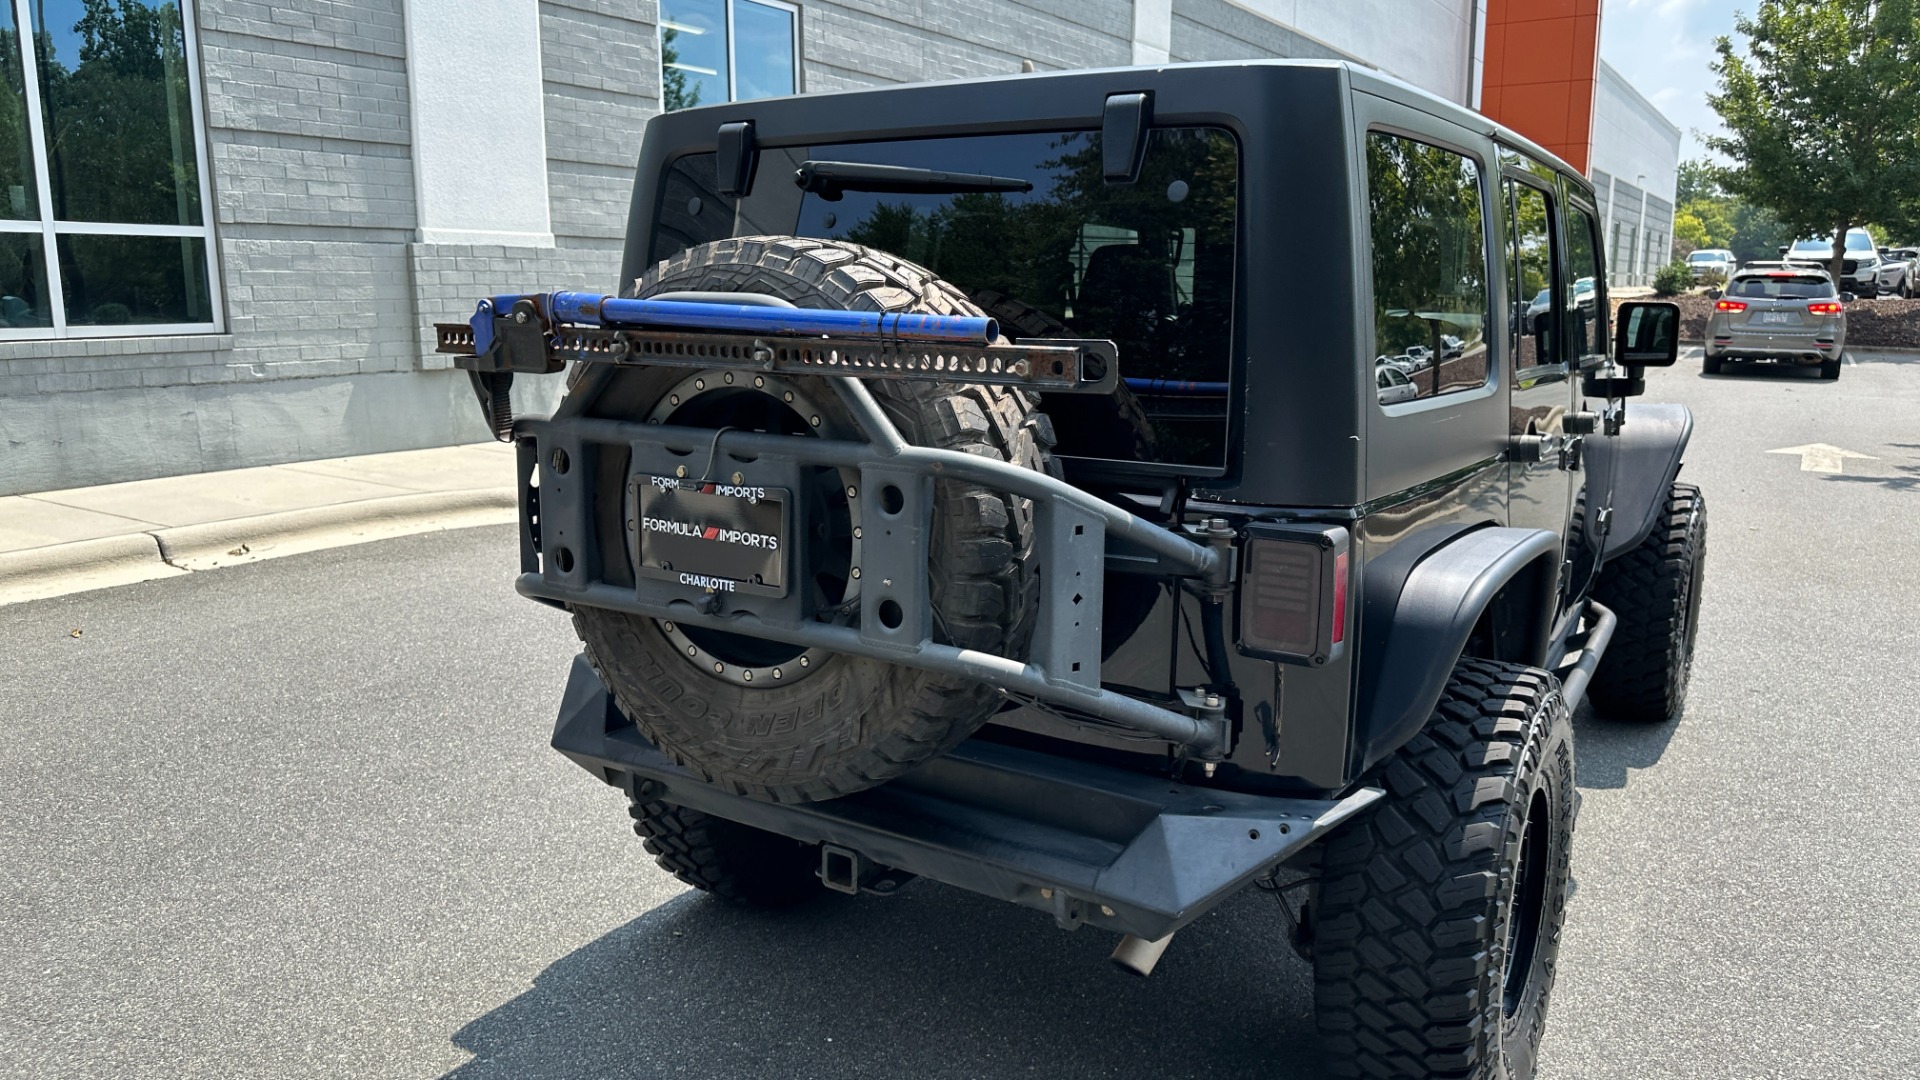 Used 2013 Jeep Wrangler Unlimited Sport / FOX SHOCKS / SOUND SYSTEM / TOUCHSCREEN / SUBWOOFER / TERRAFLEX SUS for sale $24,999 at Formula Imports in Charlotte NC 28227 5